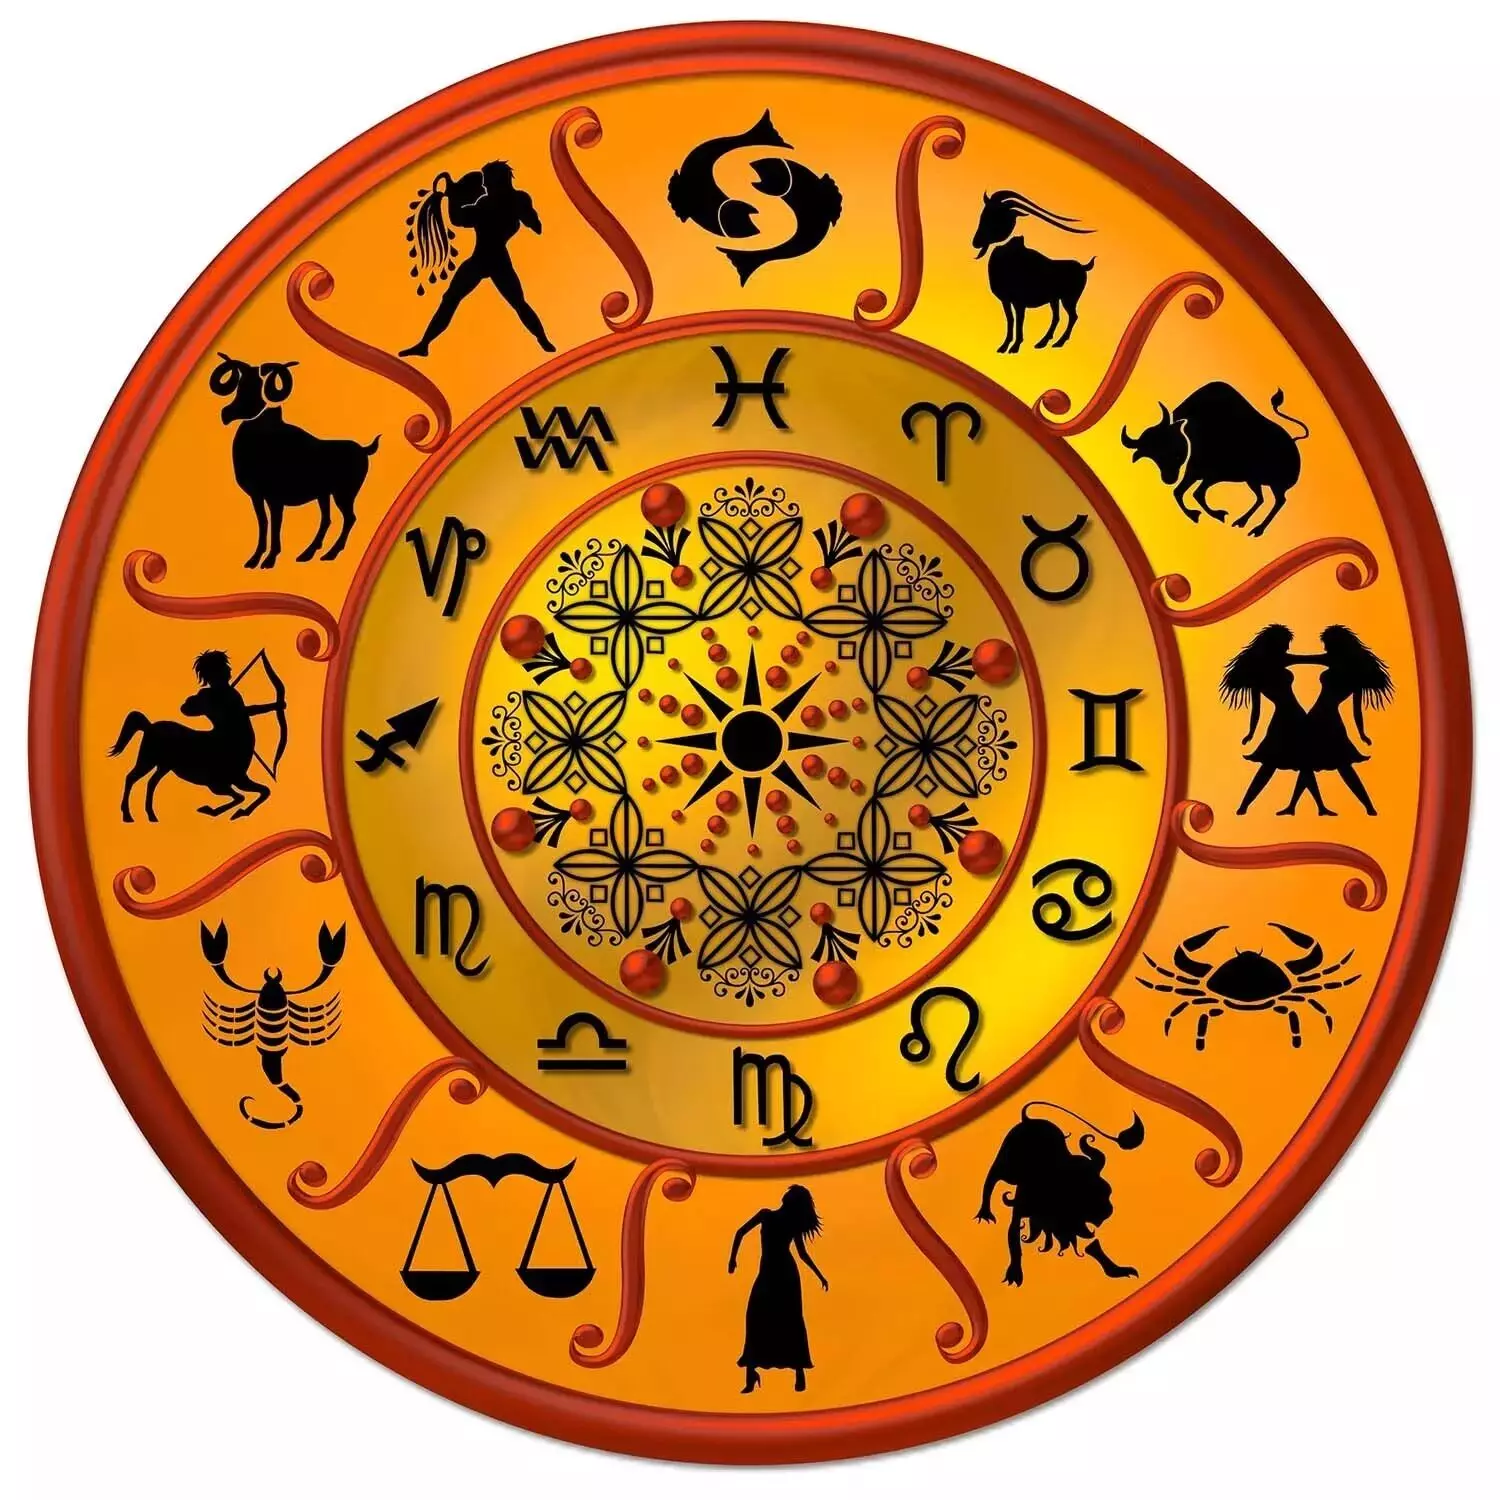 06 February – Know Your Todays Horoscope